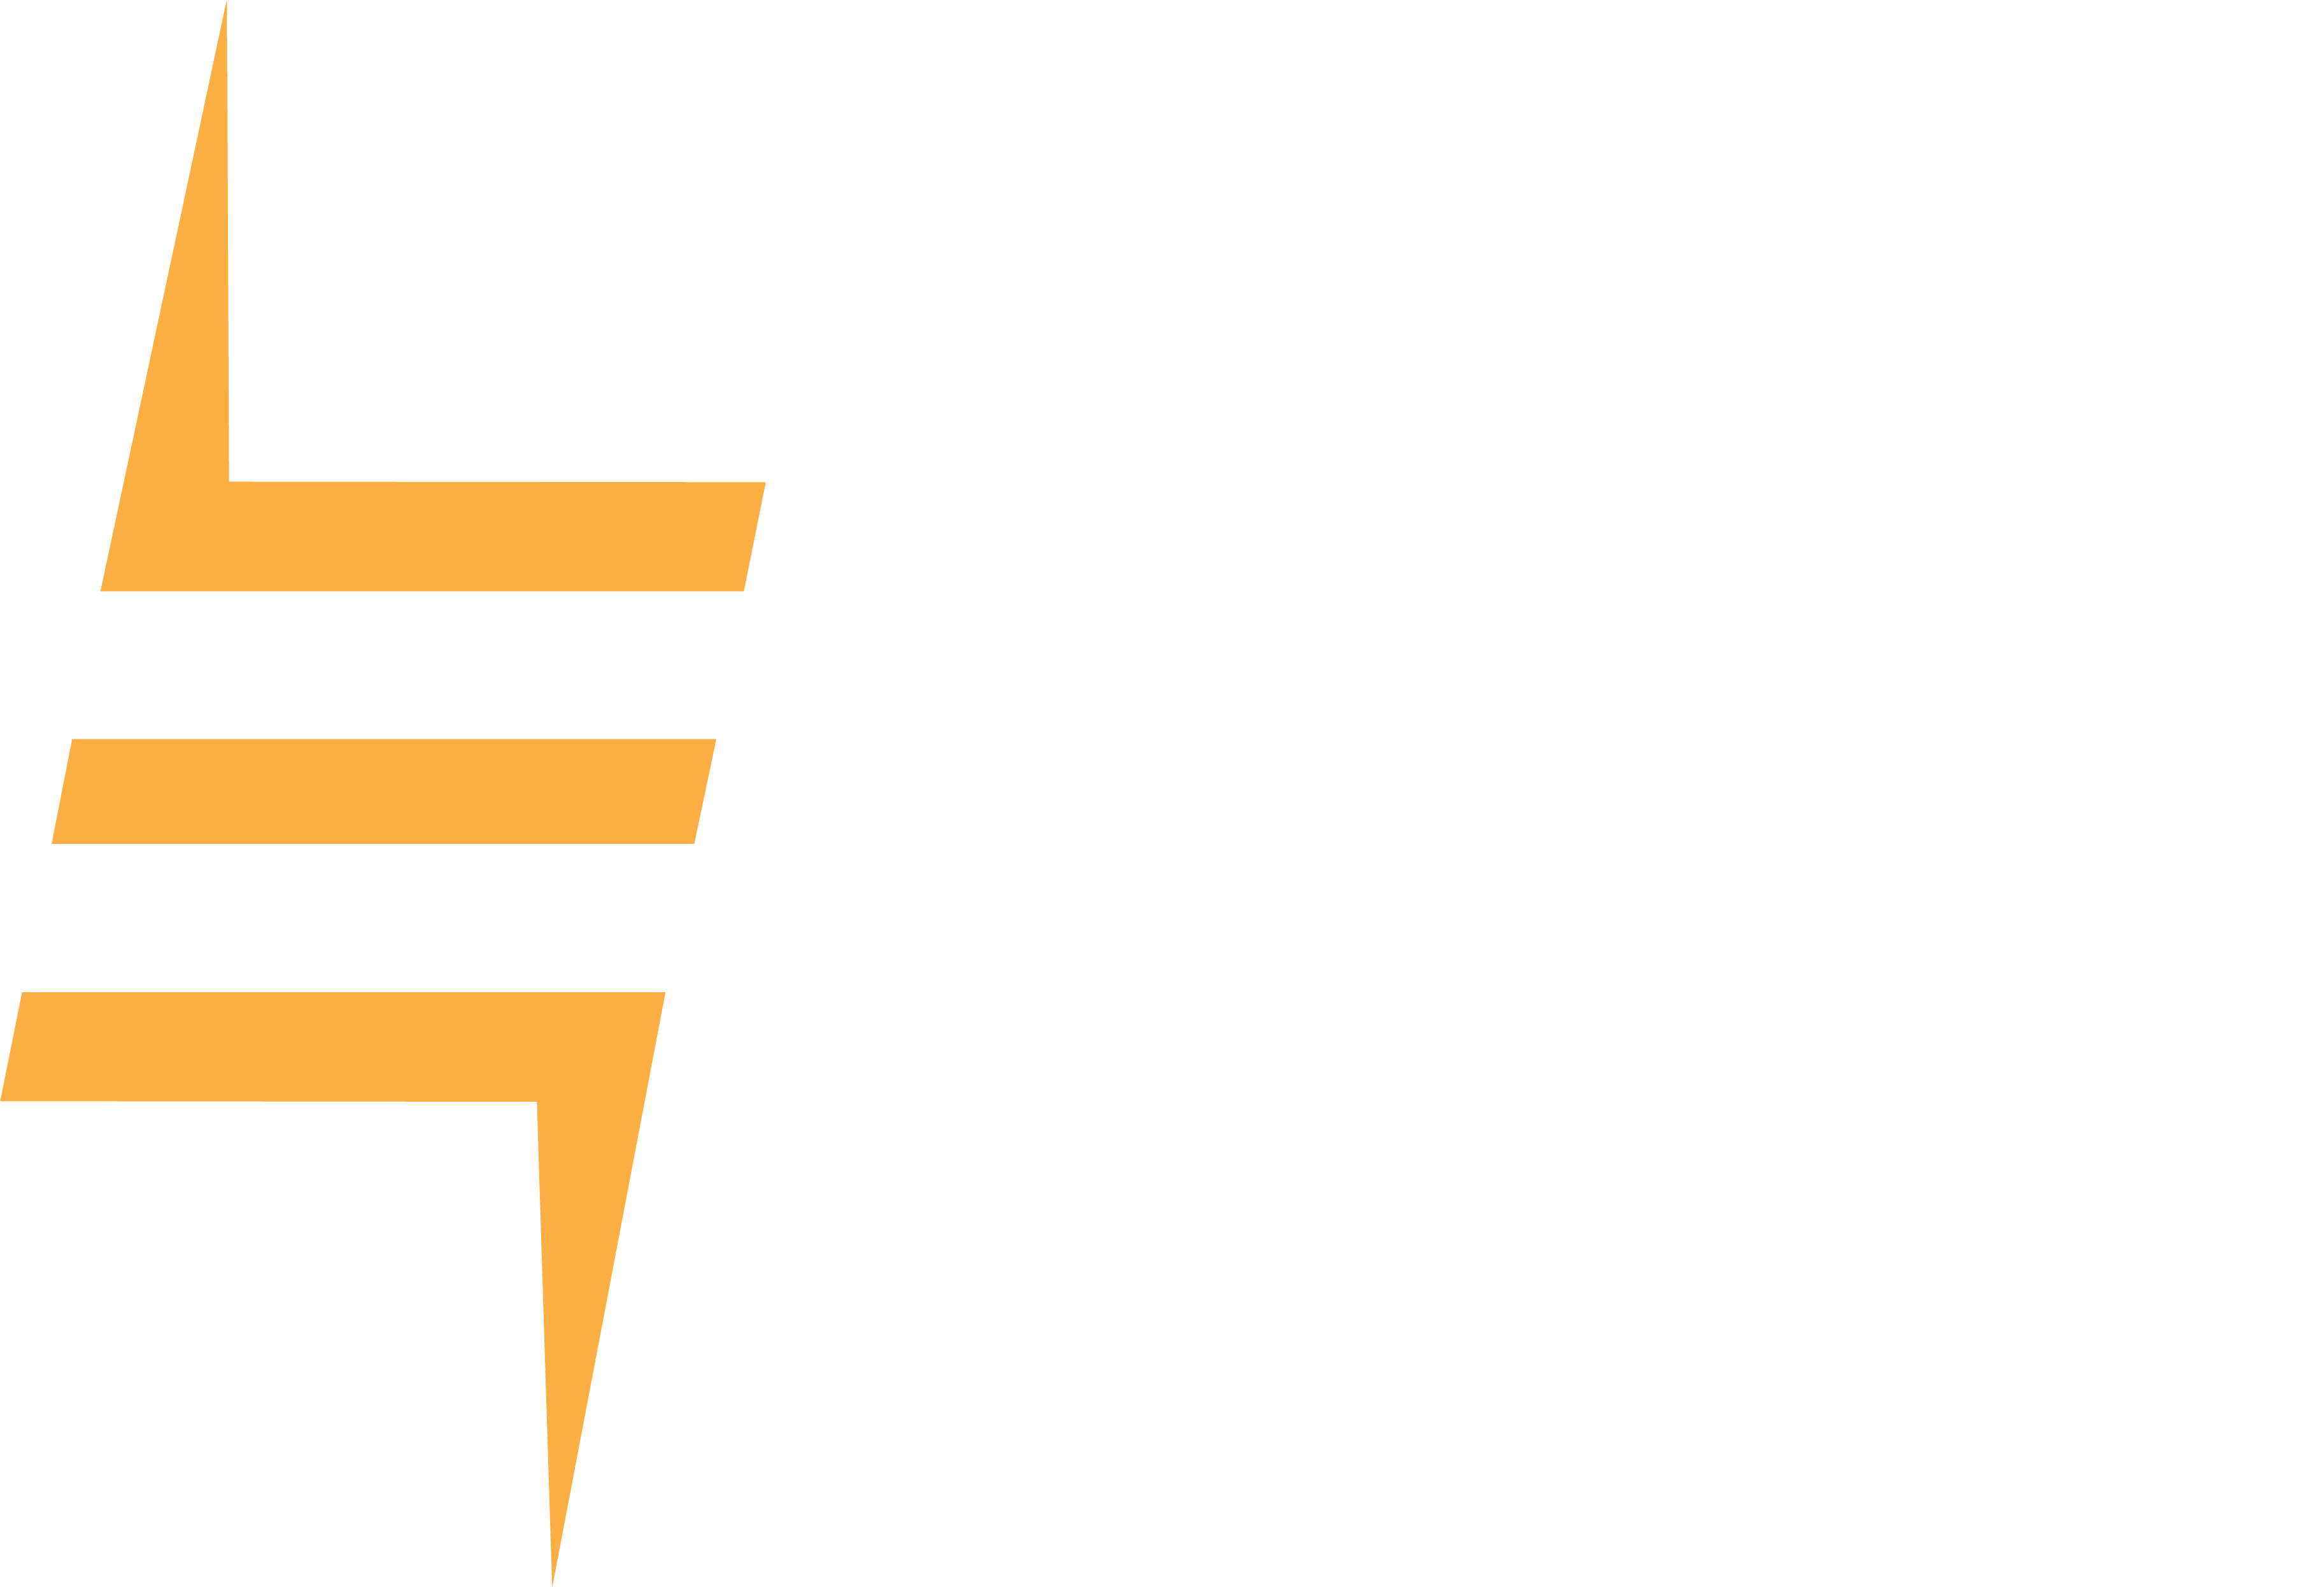 Elson Electric